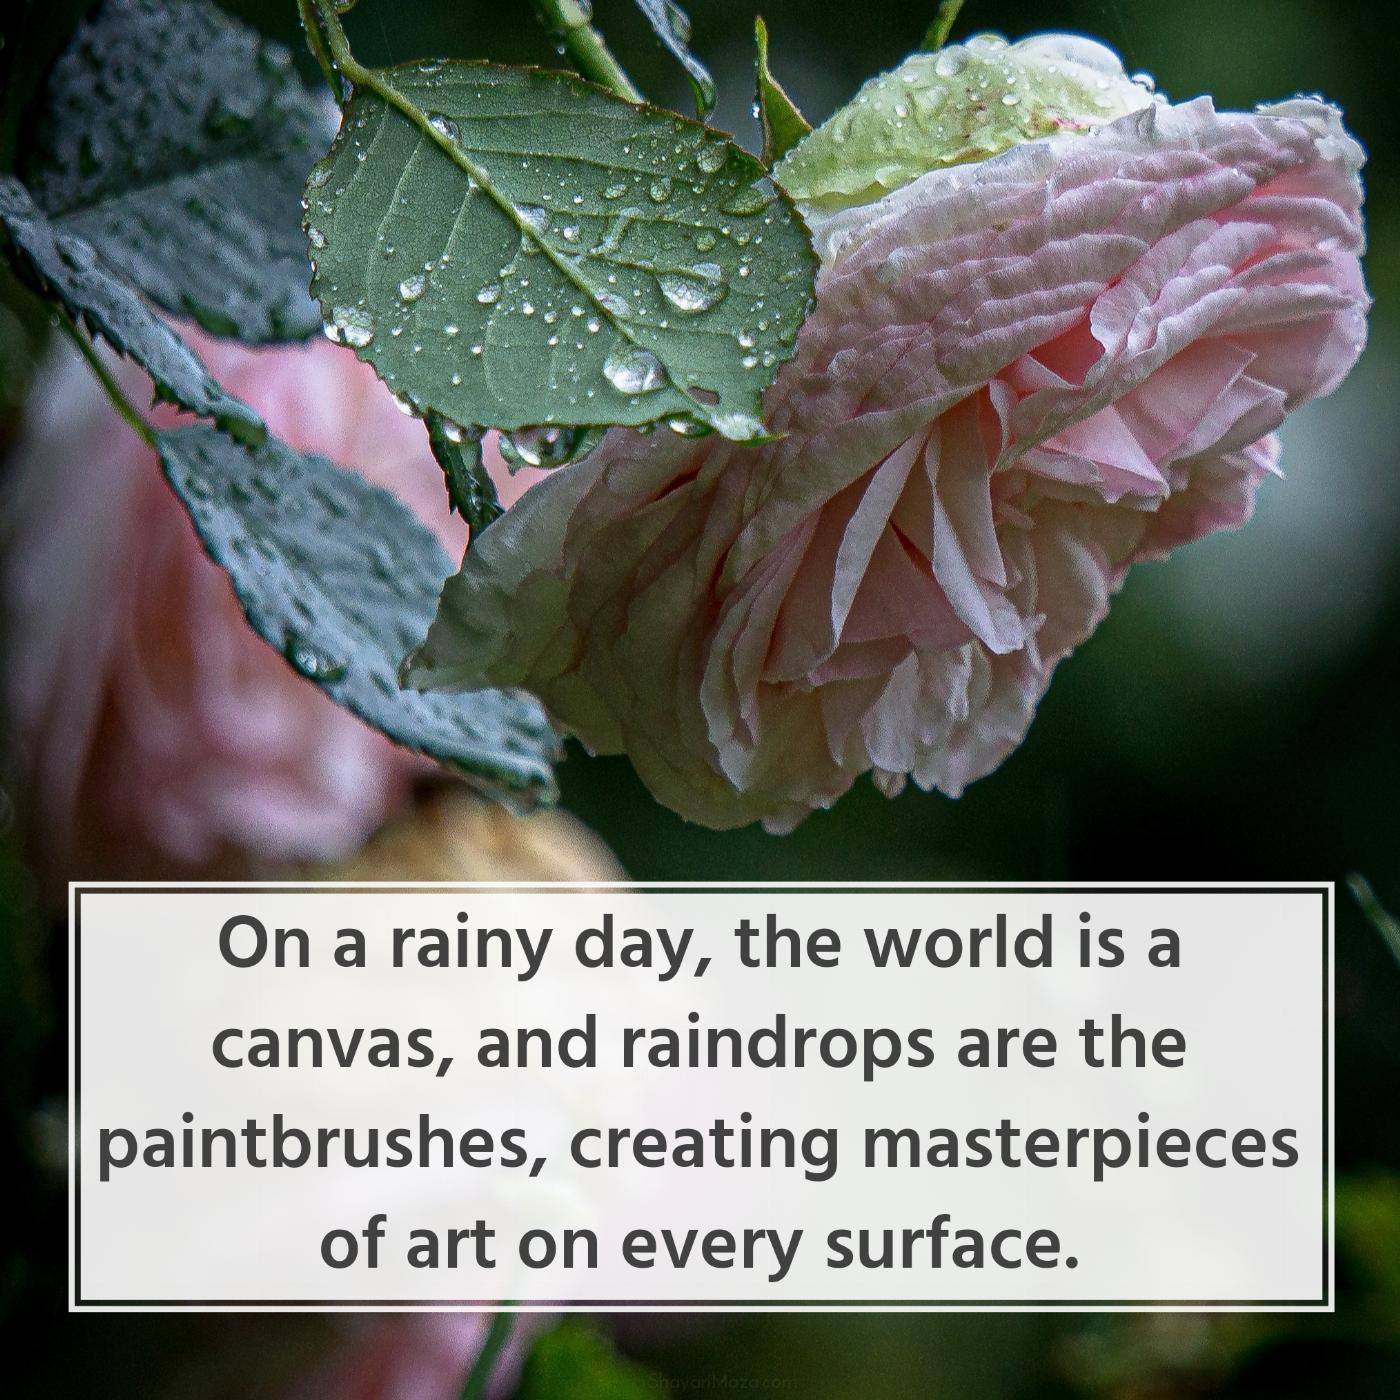 On a rainy day the world is a canvas and raindrops are the paintbrushes